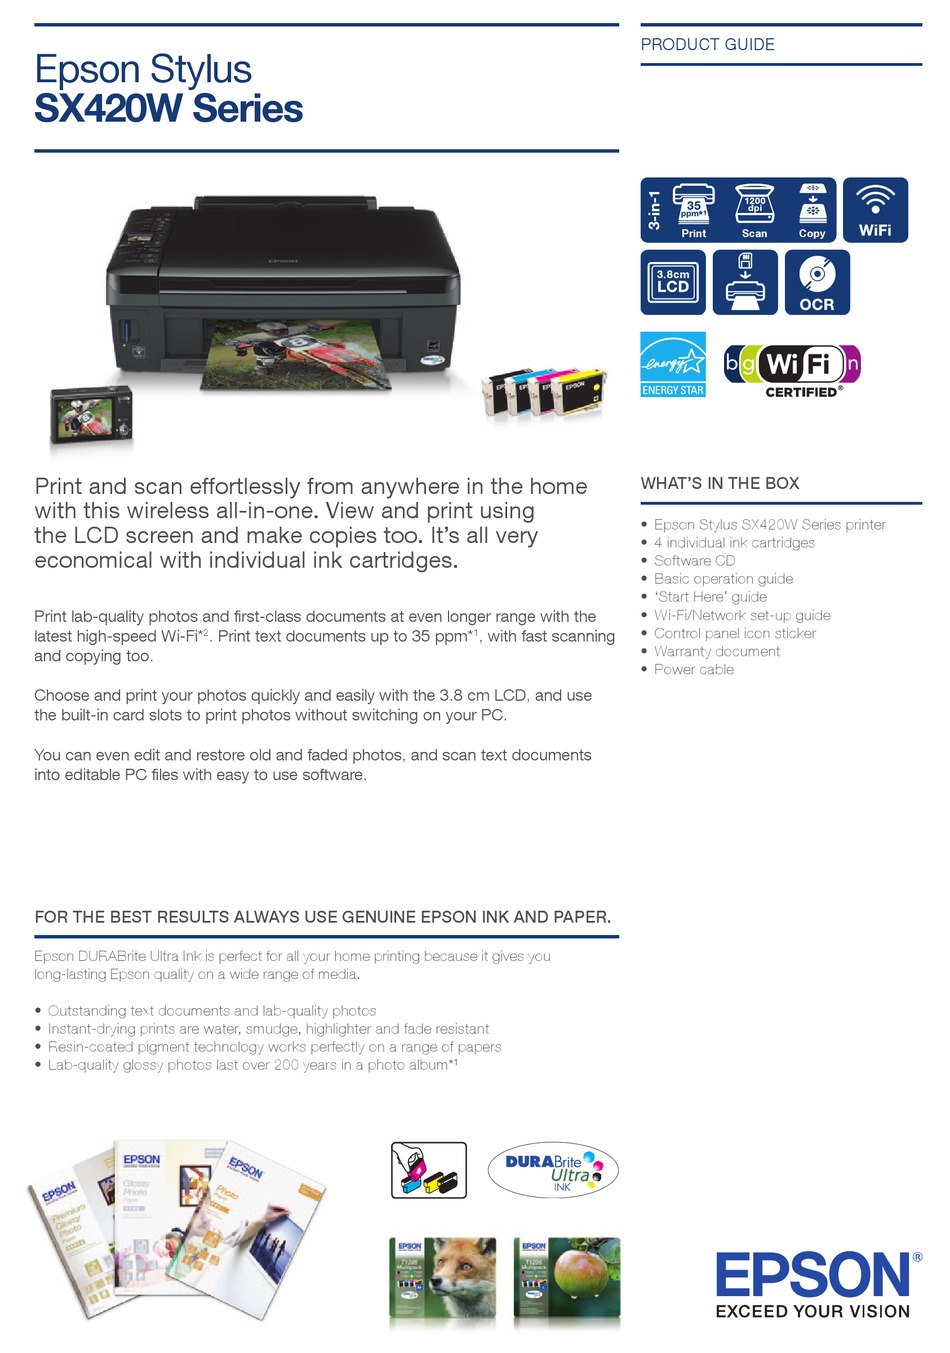 solo ironi nyhed EPSON STYLUS SX420W SERIES PRODUCT MANUAL Pdf Download | ManualsLib